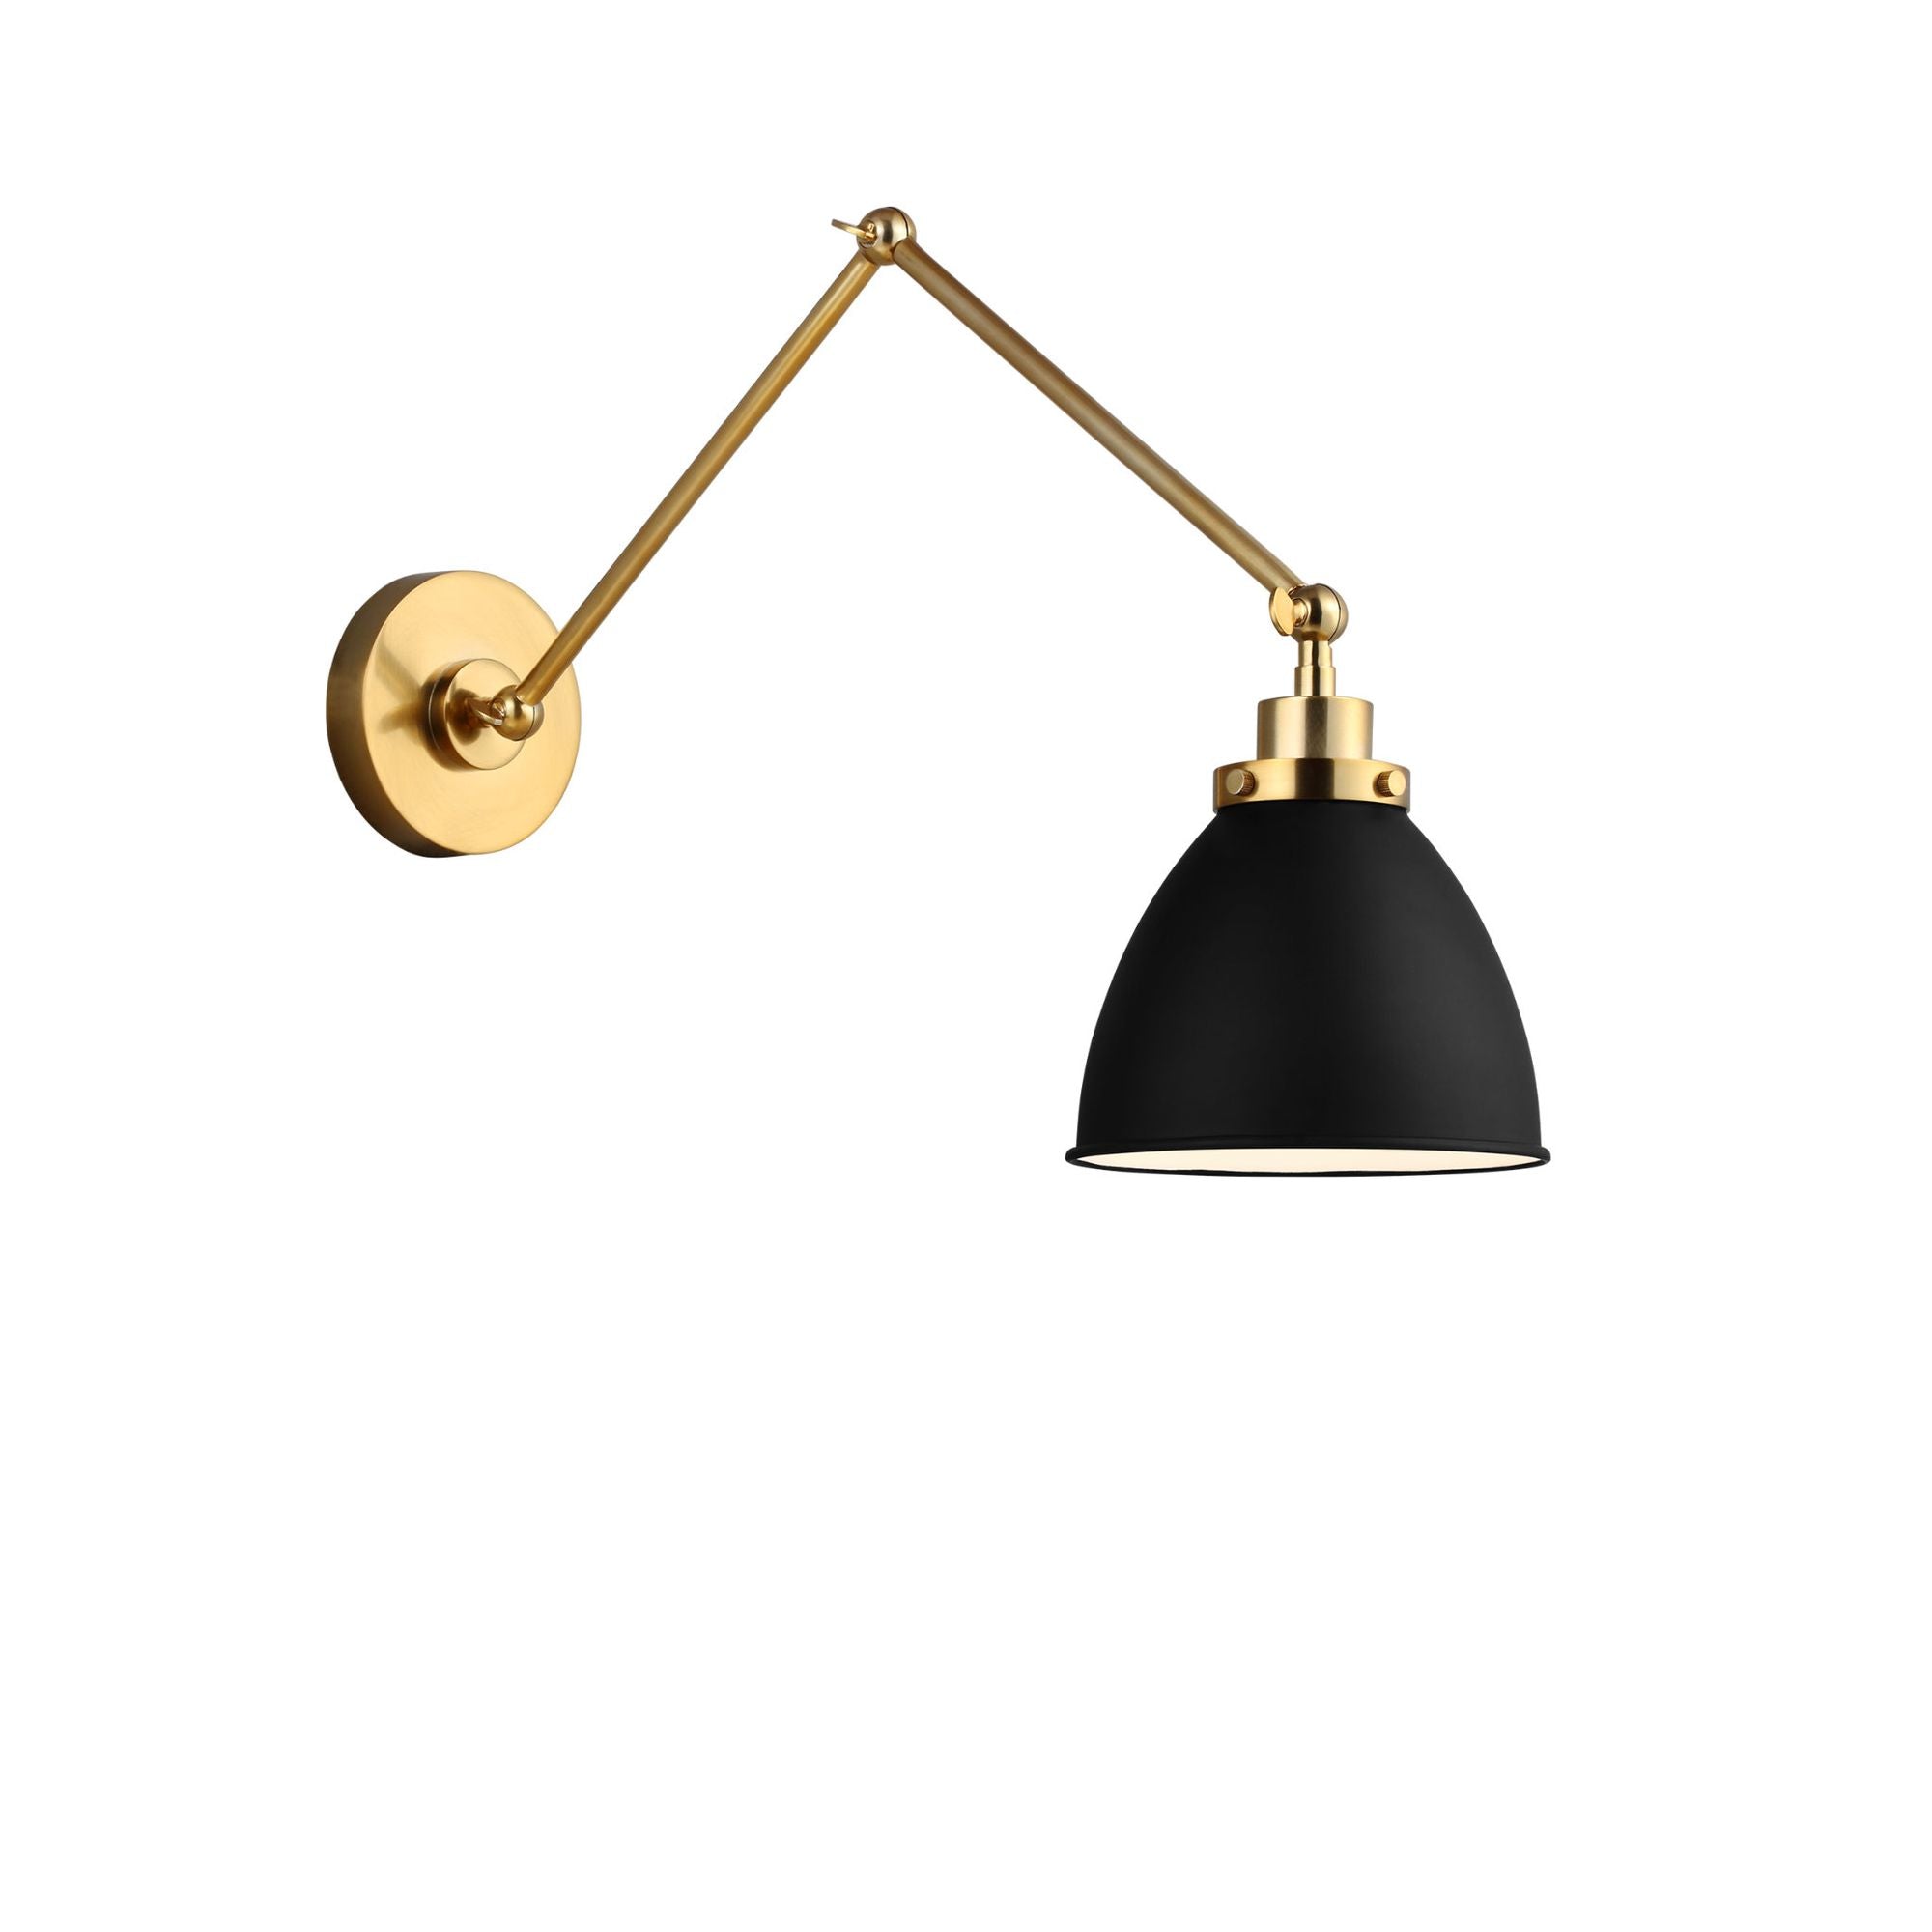 Chapman & Myers Wellfleet Double Arm Dome Task Sconce in Midnight Black and Burnished Brass